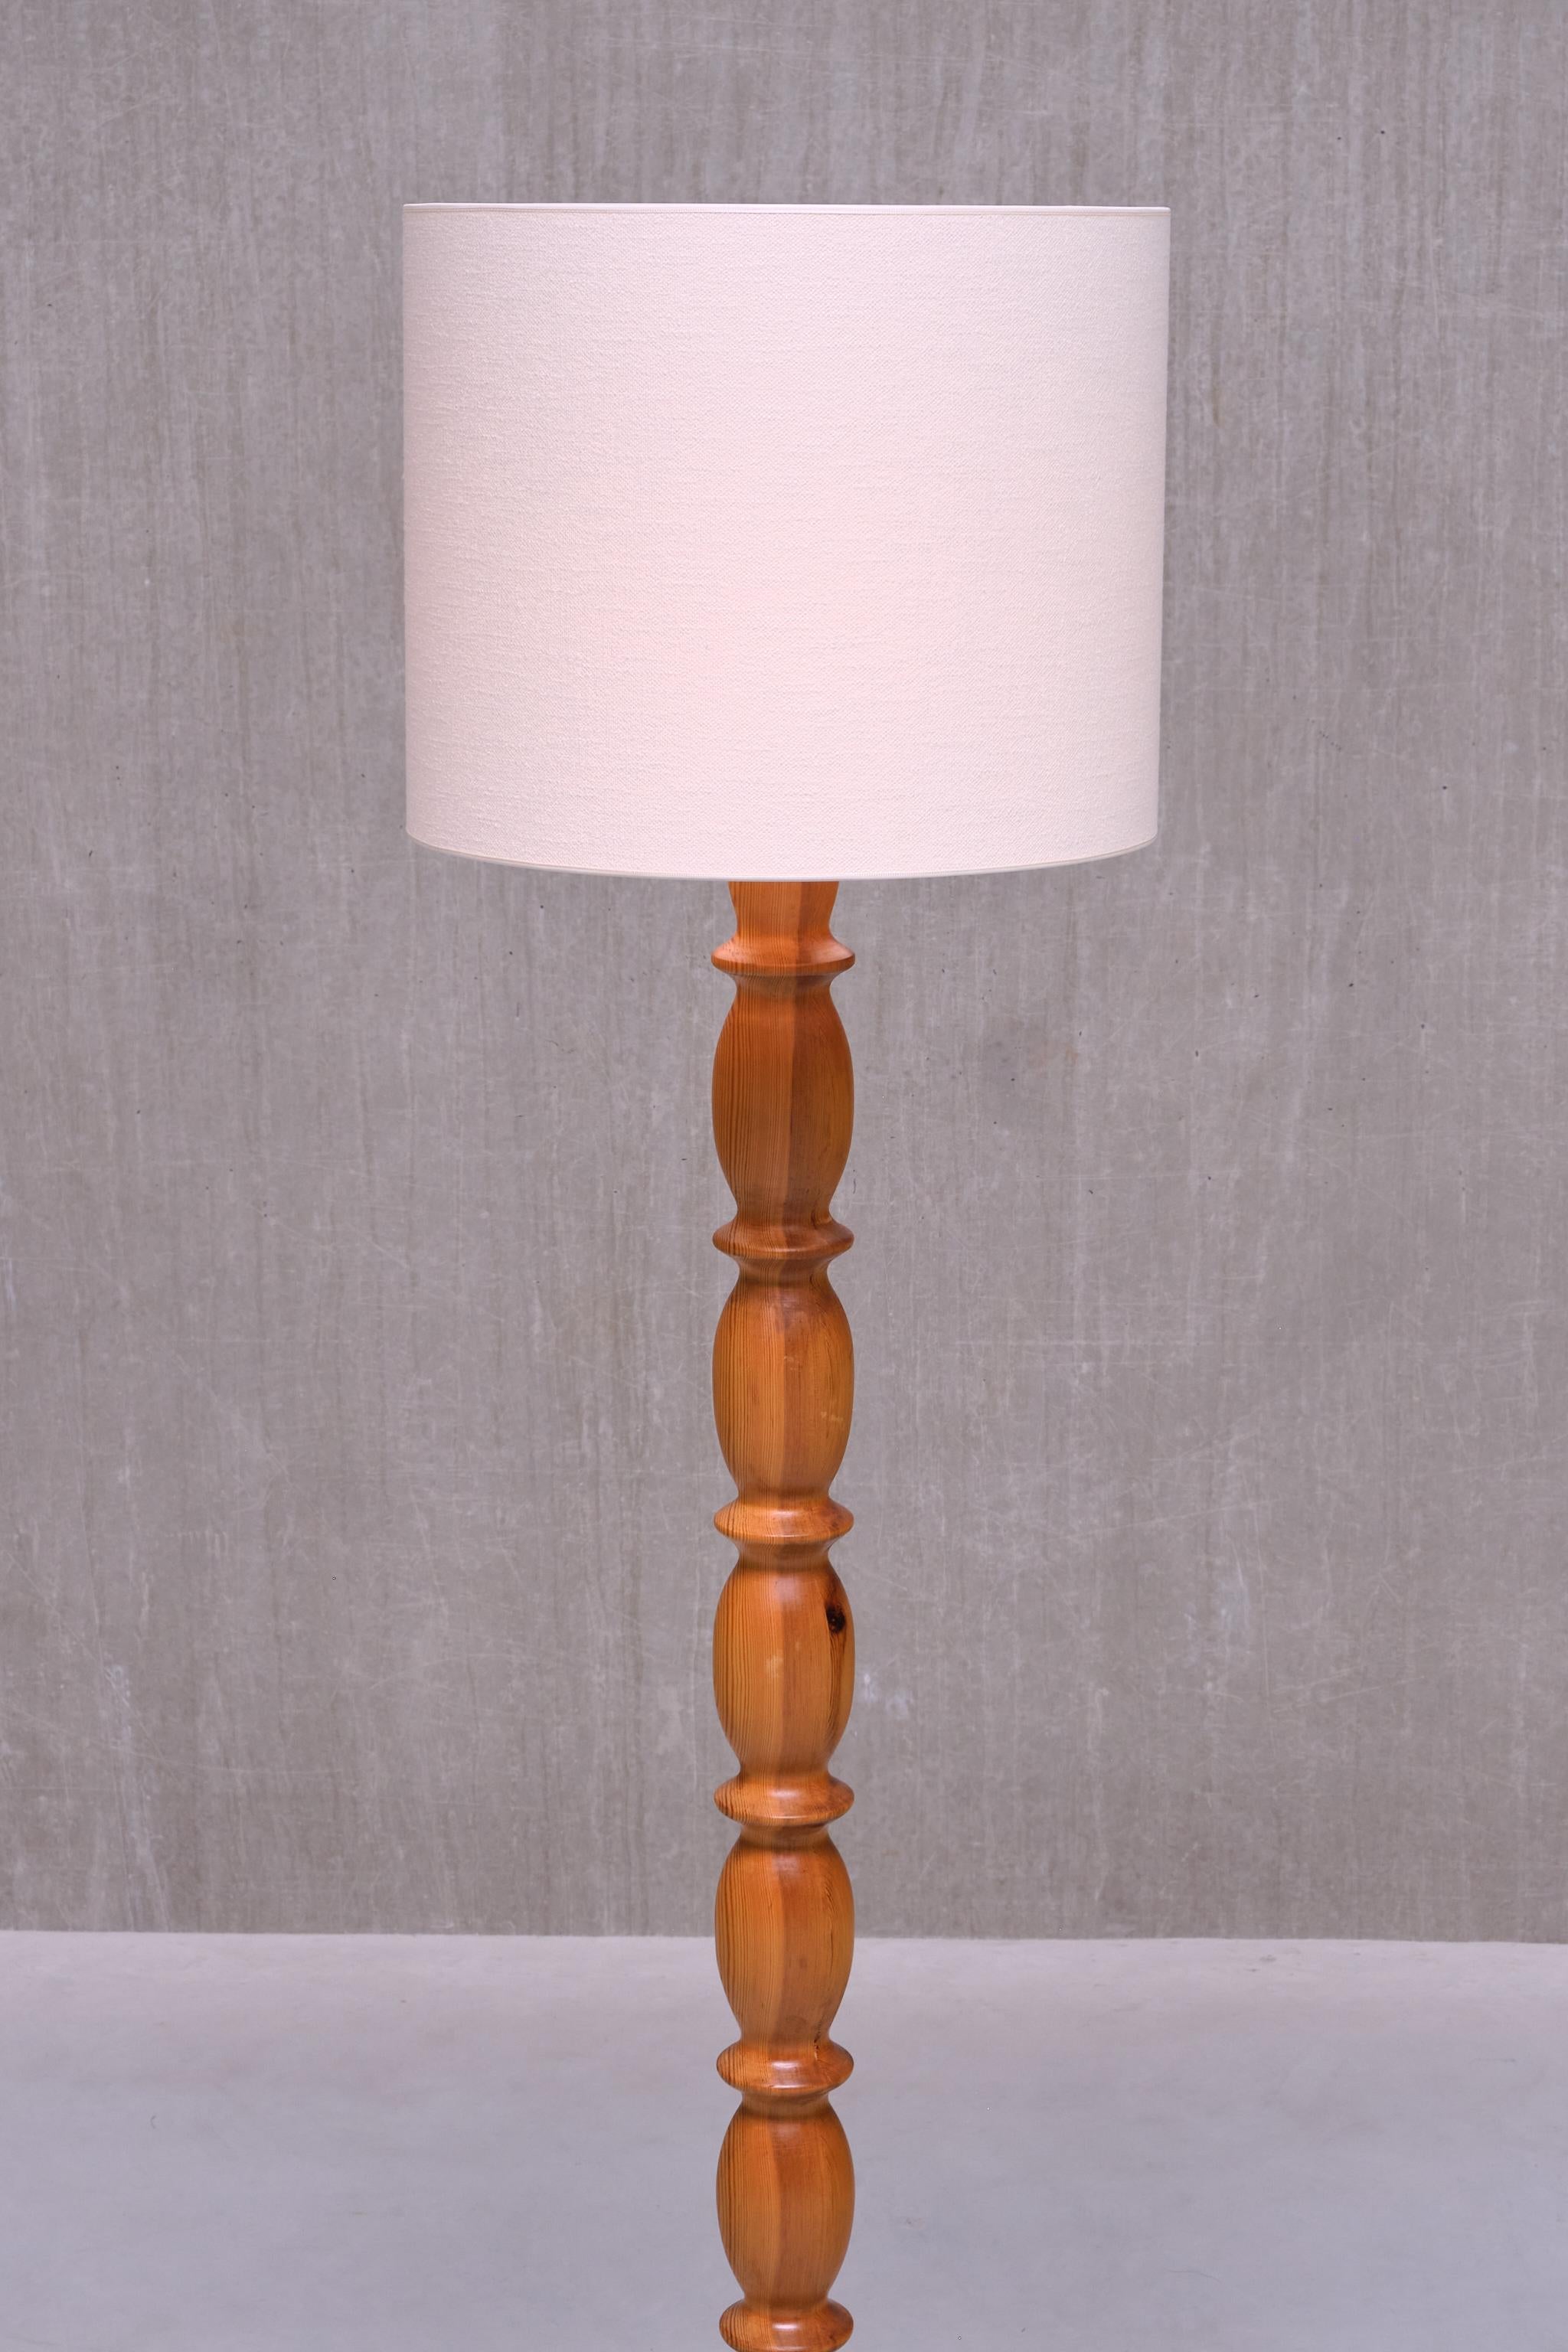 Swedish Modern Floor Lamp in Carved Solid Pine Wood, 1960s For Sale 2